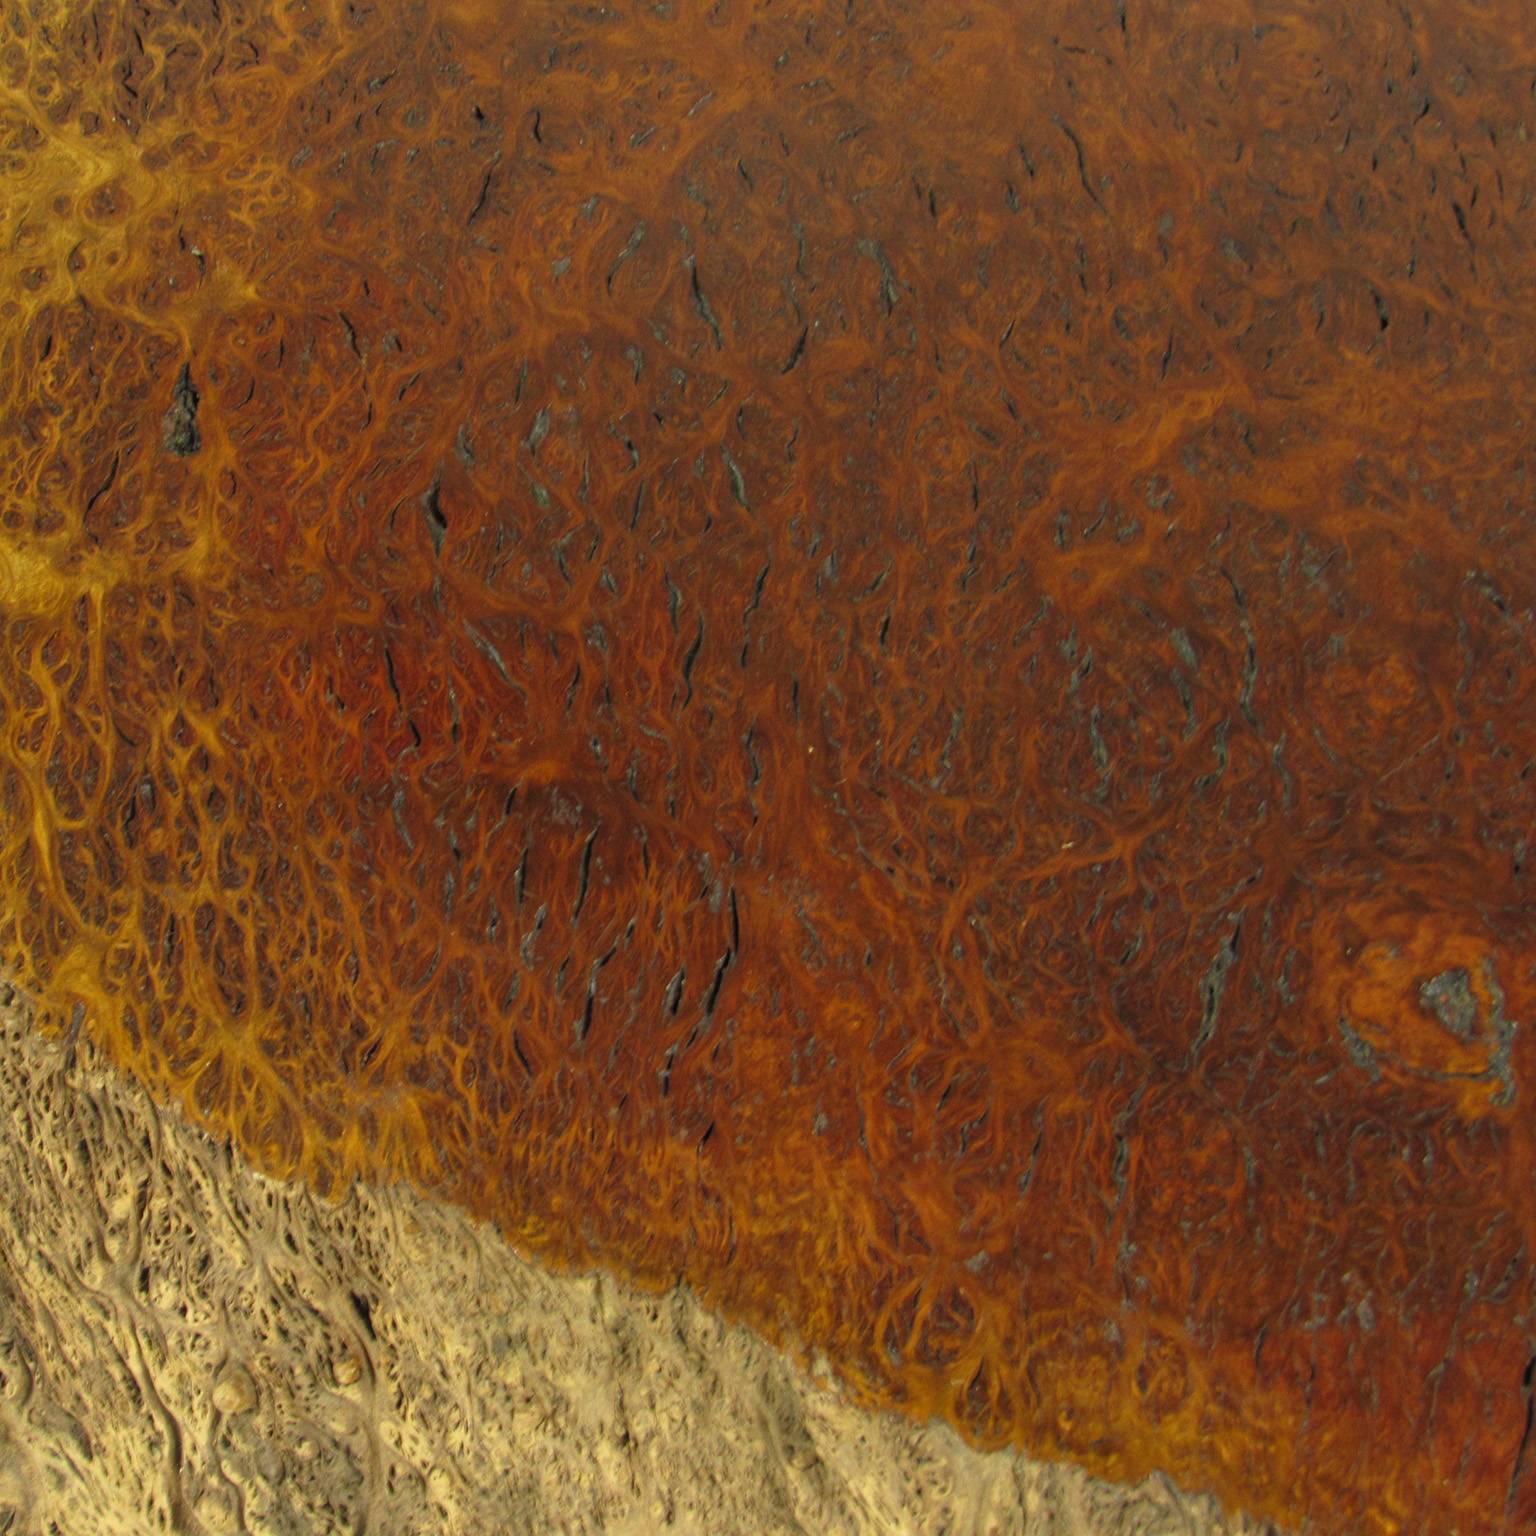 Jarrah wood specimen top. Incredible patina. Ideal for a tabletop!!
Dimensions: 4 1/2 x 29 1/2 x 22 inches.